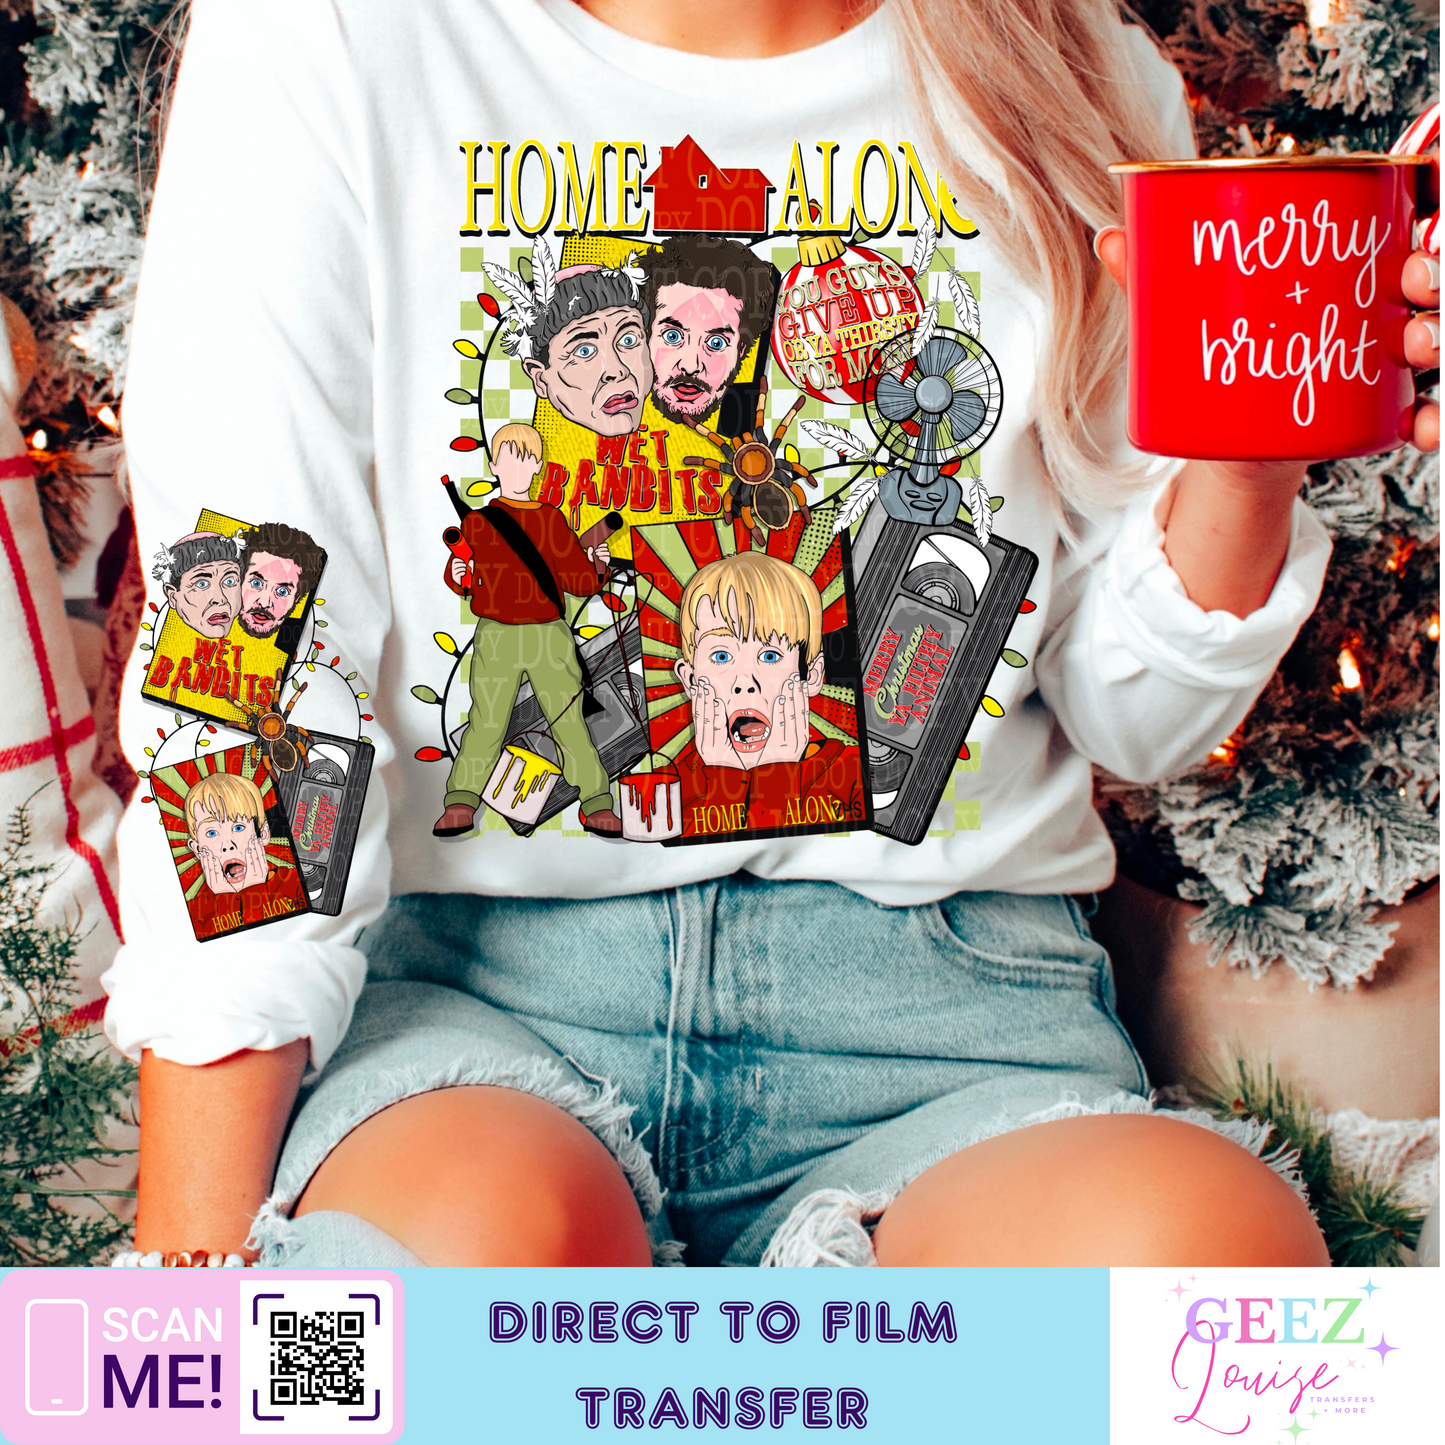 Home alone - Direct to Film Transfer - made to order